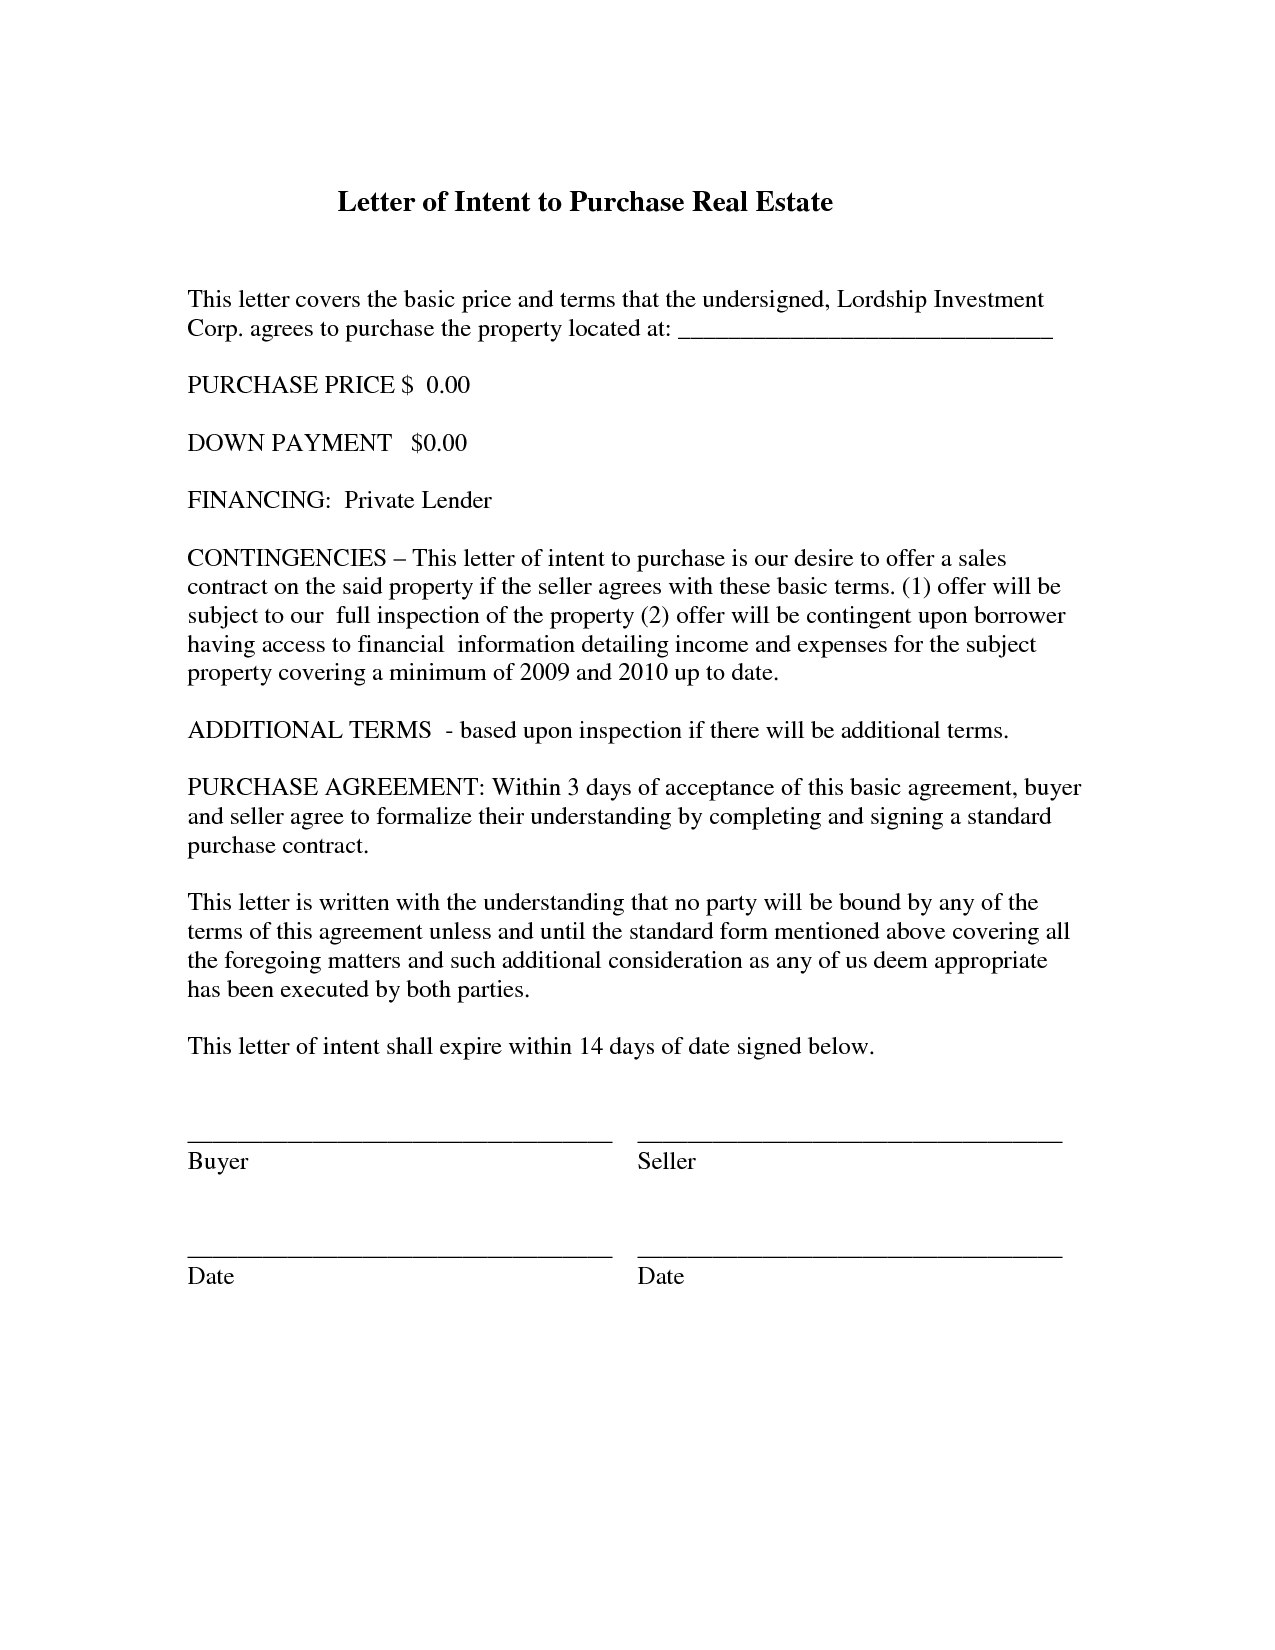 Real Estate Letter Of Intent Template - Letter Intent to Purchaseoperty Uk Template Sample Buy Real